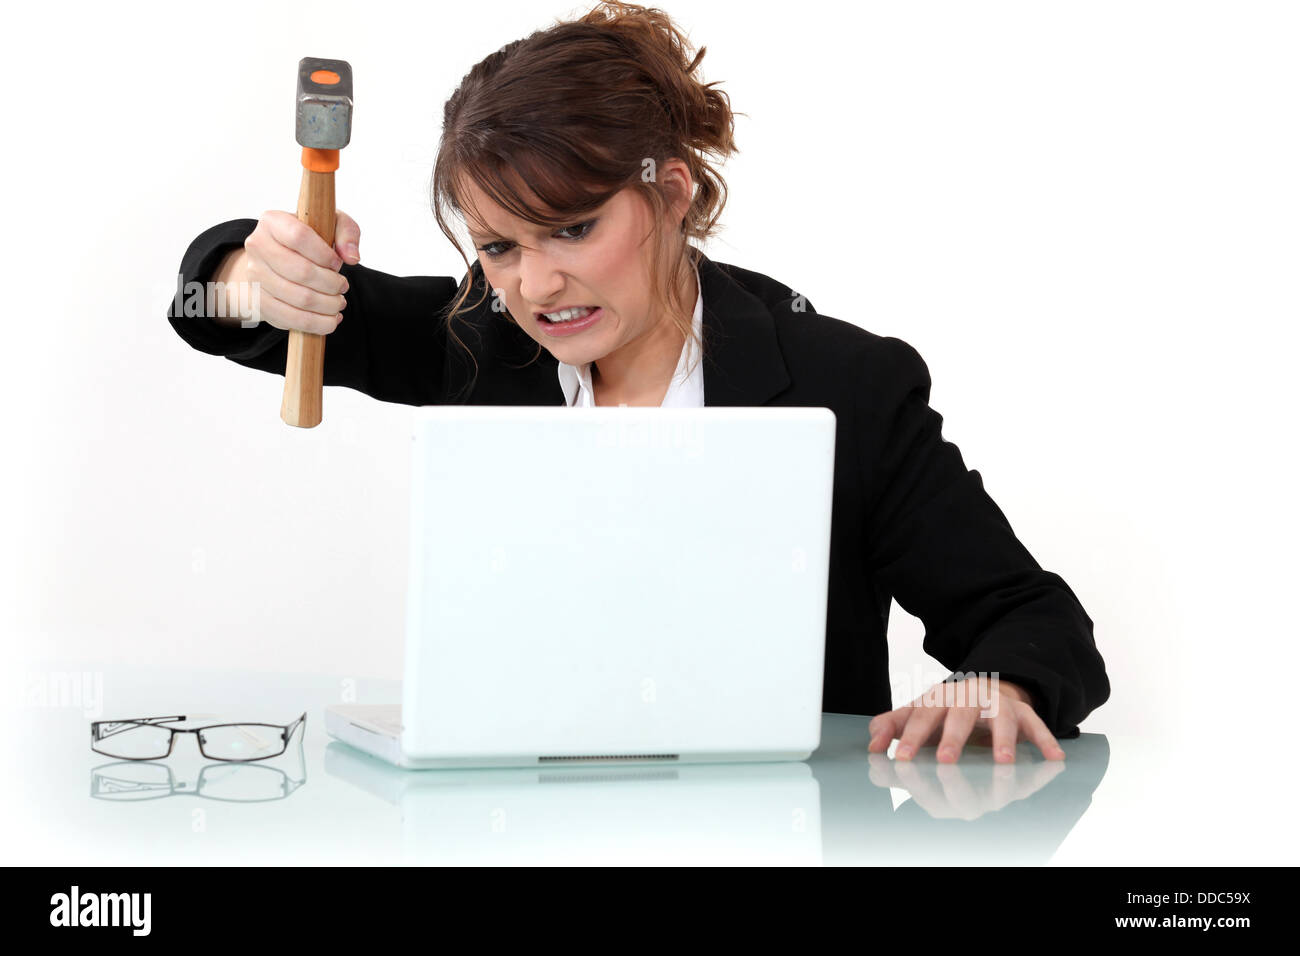 woman destroying laptop with hammer Stock Photo - Alamy